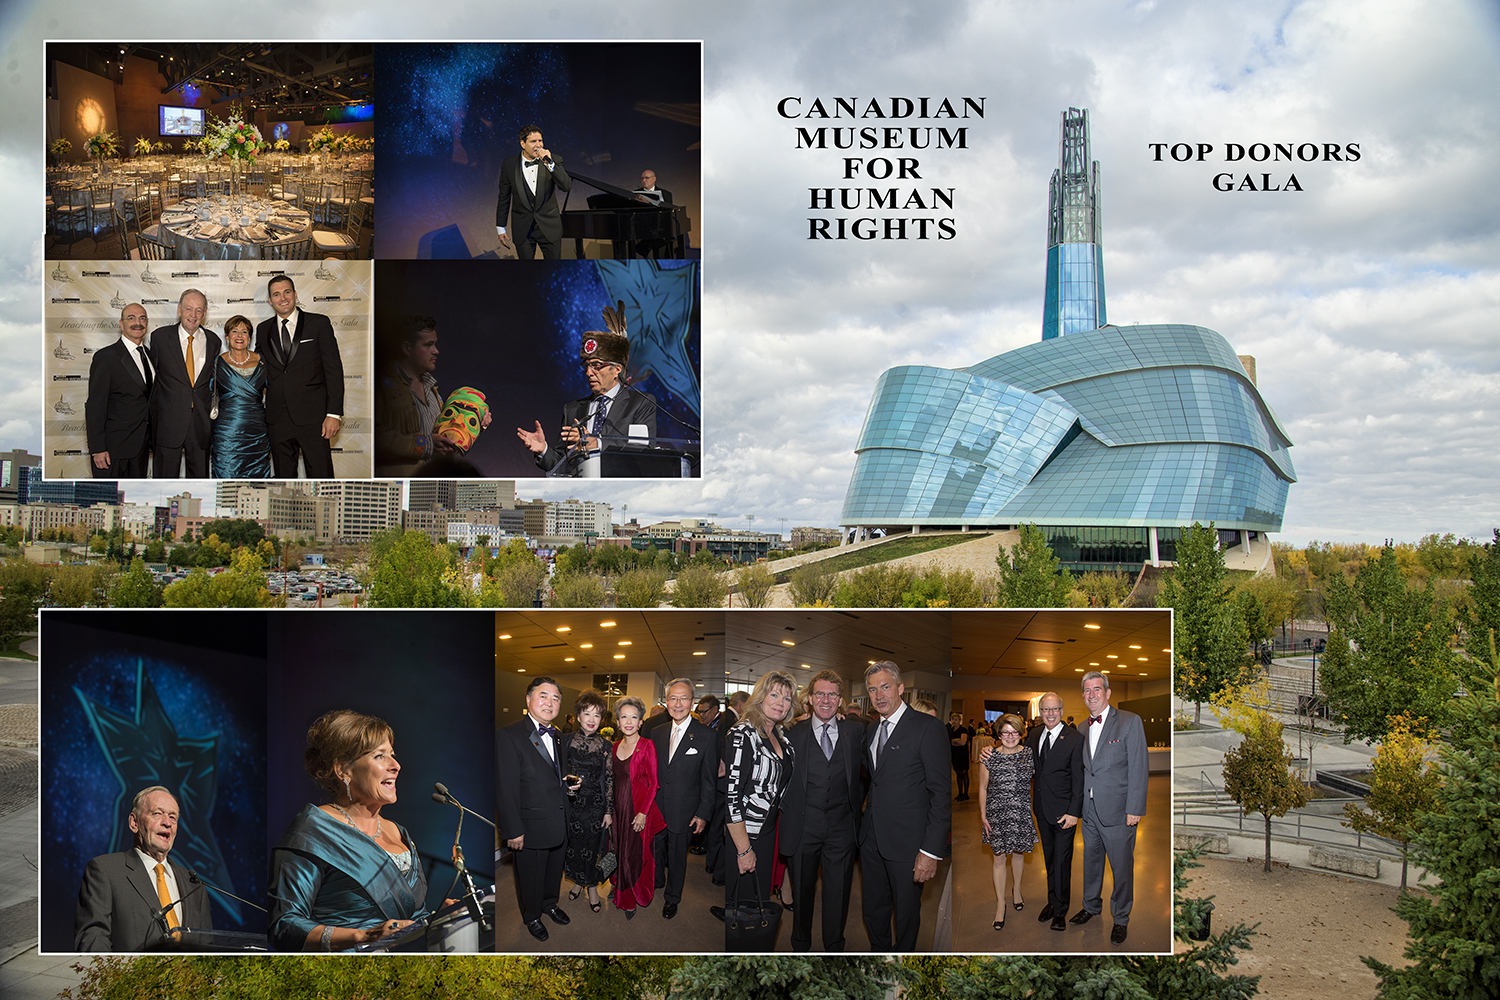 Canadian Museum for Human Rights Top Donor Gala